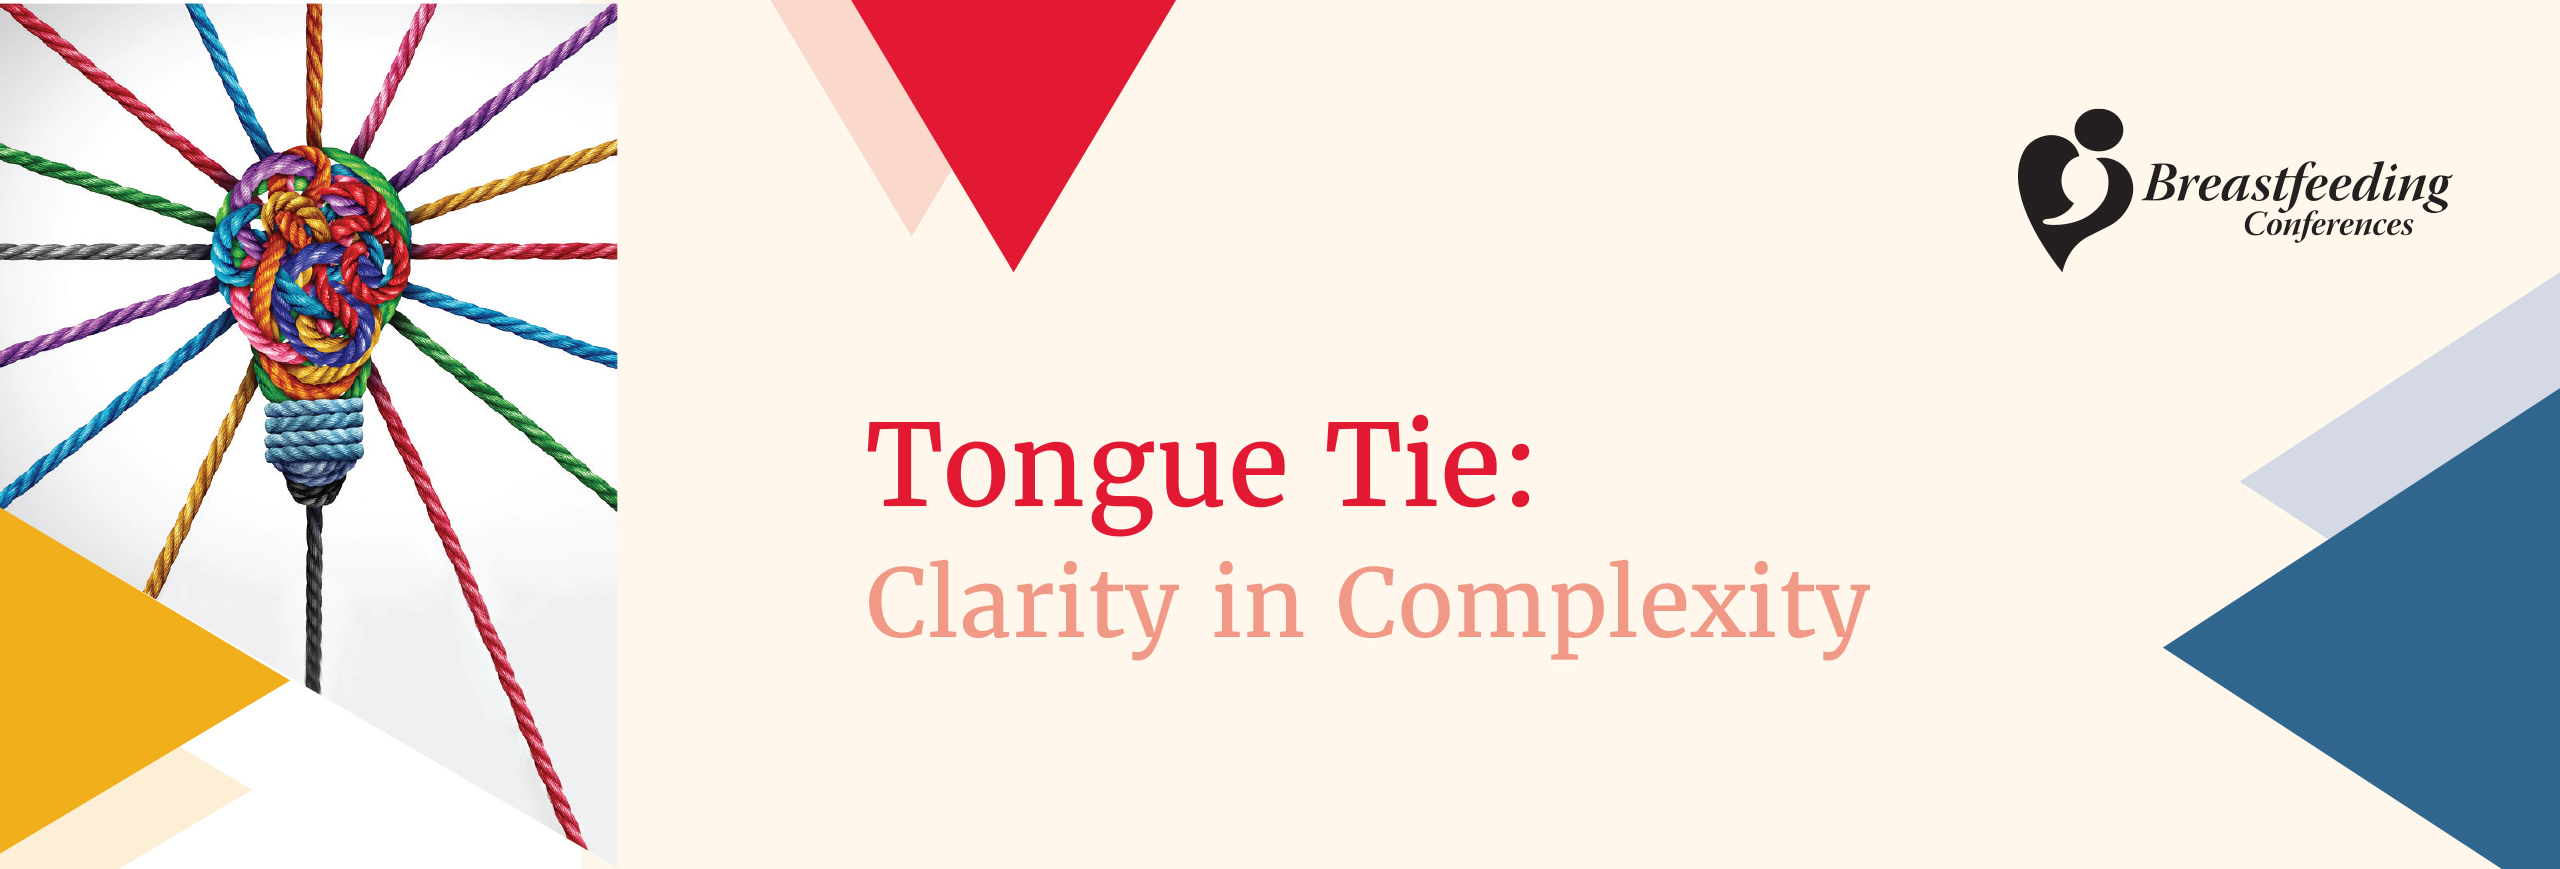 Tongue Tie: Clarity in Complexity